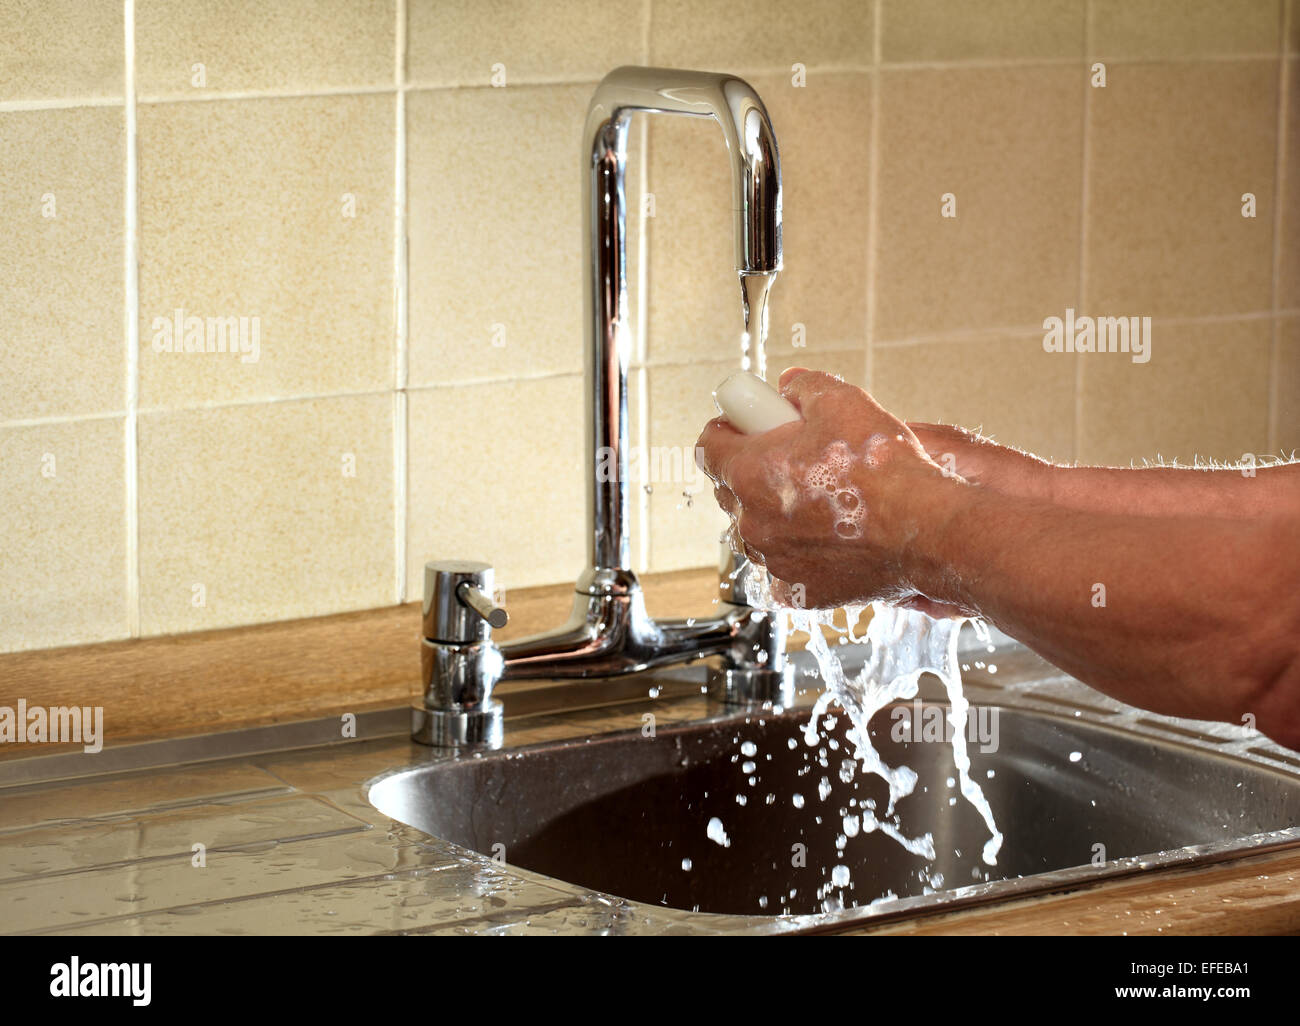 A man washes his hands under a running  faucet; this image is back lit to show detail in the water Stock Photo